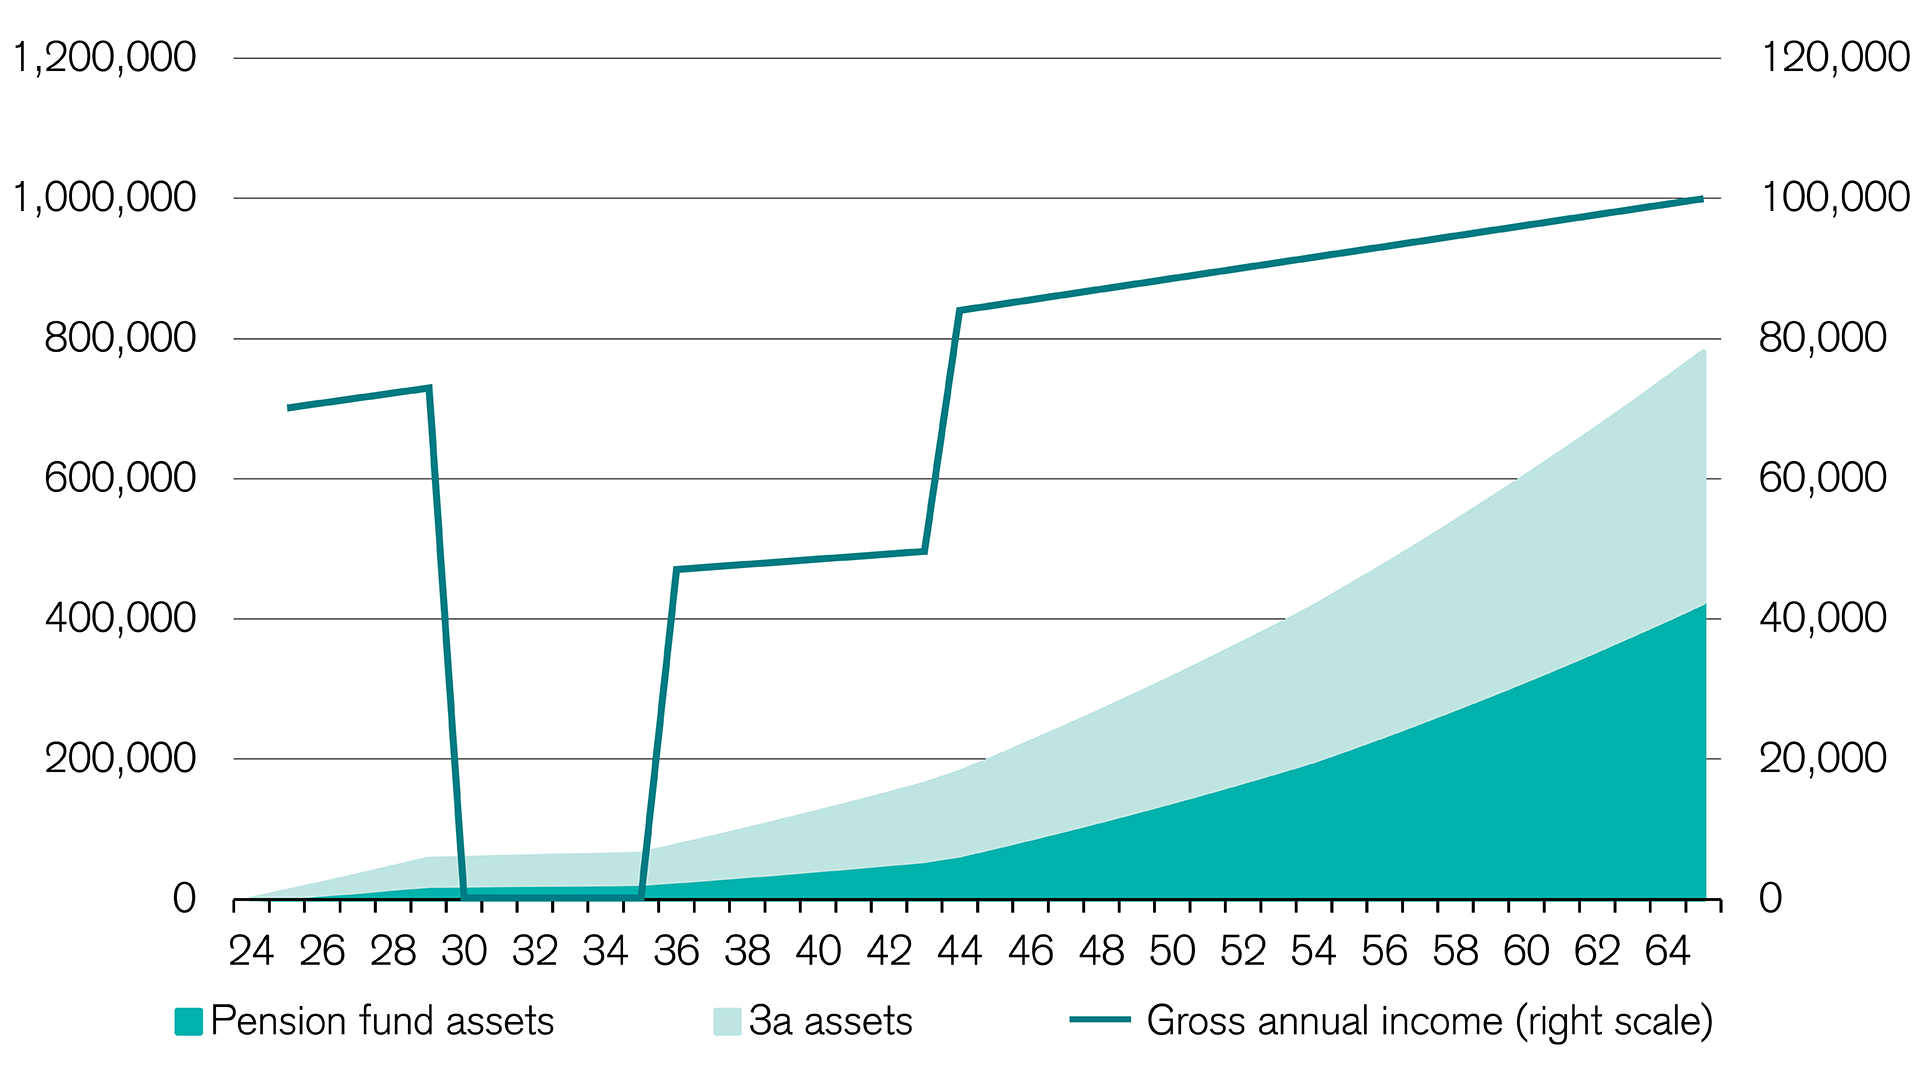 Career breaks and part-time work have a noticeable impact on the accumulation of pension assets